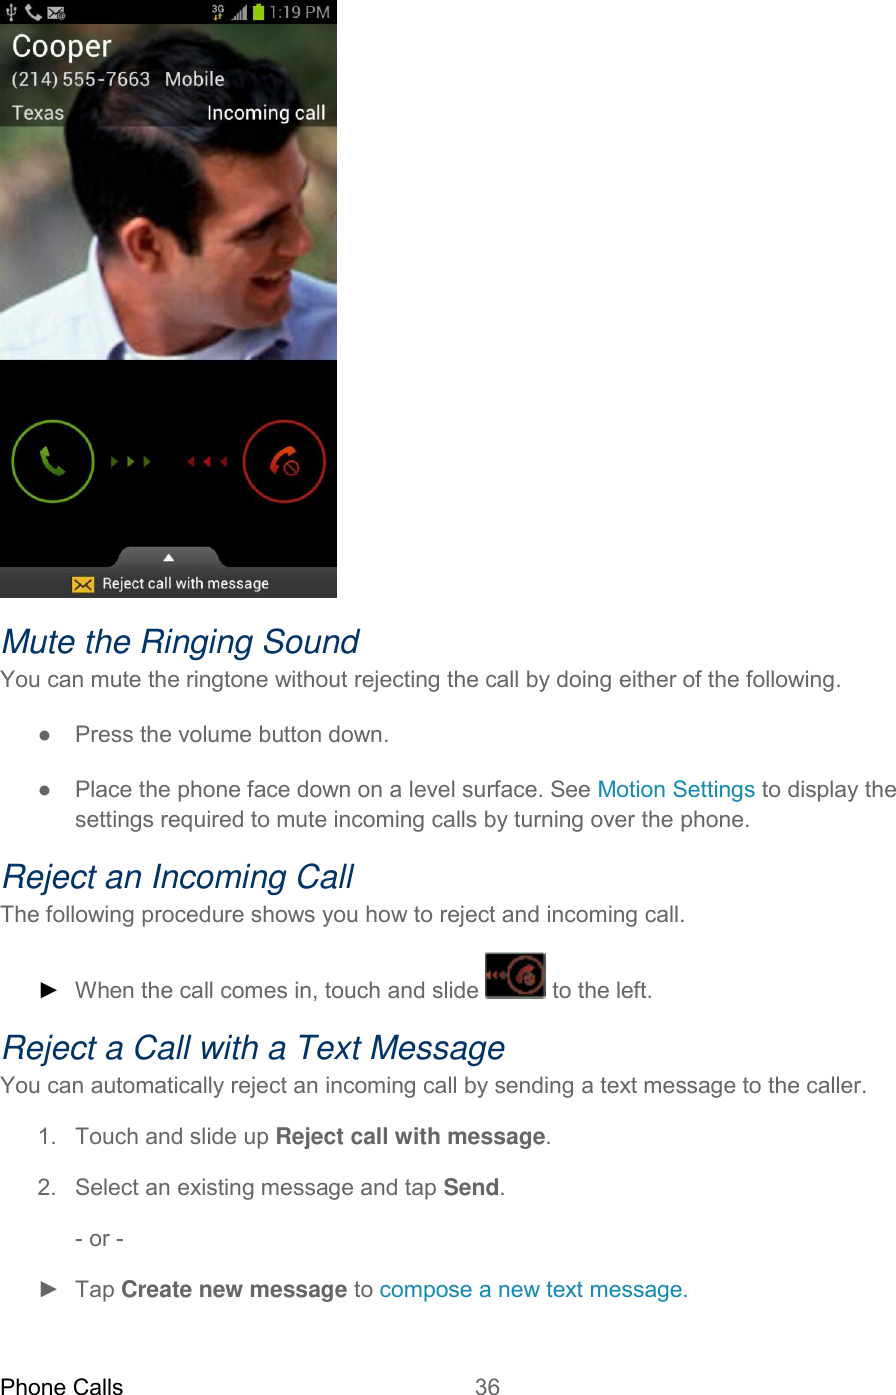 Phone Calls 36    Mute the Ringing Sound You can mute the ringtone without rejecting the call by doing either of the following. ●  Press the volume button down. ●  Place the phone face down on a level surface. See Motion Settings to display the settings required to mute incoming calls by turning over the phone. Reject an Incoming Call The following procedure shows you how to reject and incoming call. ► When the call comes in, touch and slide   to the left. Reject a Call with a Text Message You can automatically reject an incoming call by sending a text message to the caller. 1.  Touch and slide up Reject call with message. 2.  Select an existing message and tap Send. - or - ►  Tap Create new message to compose a new text message.  